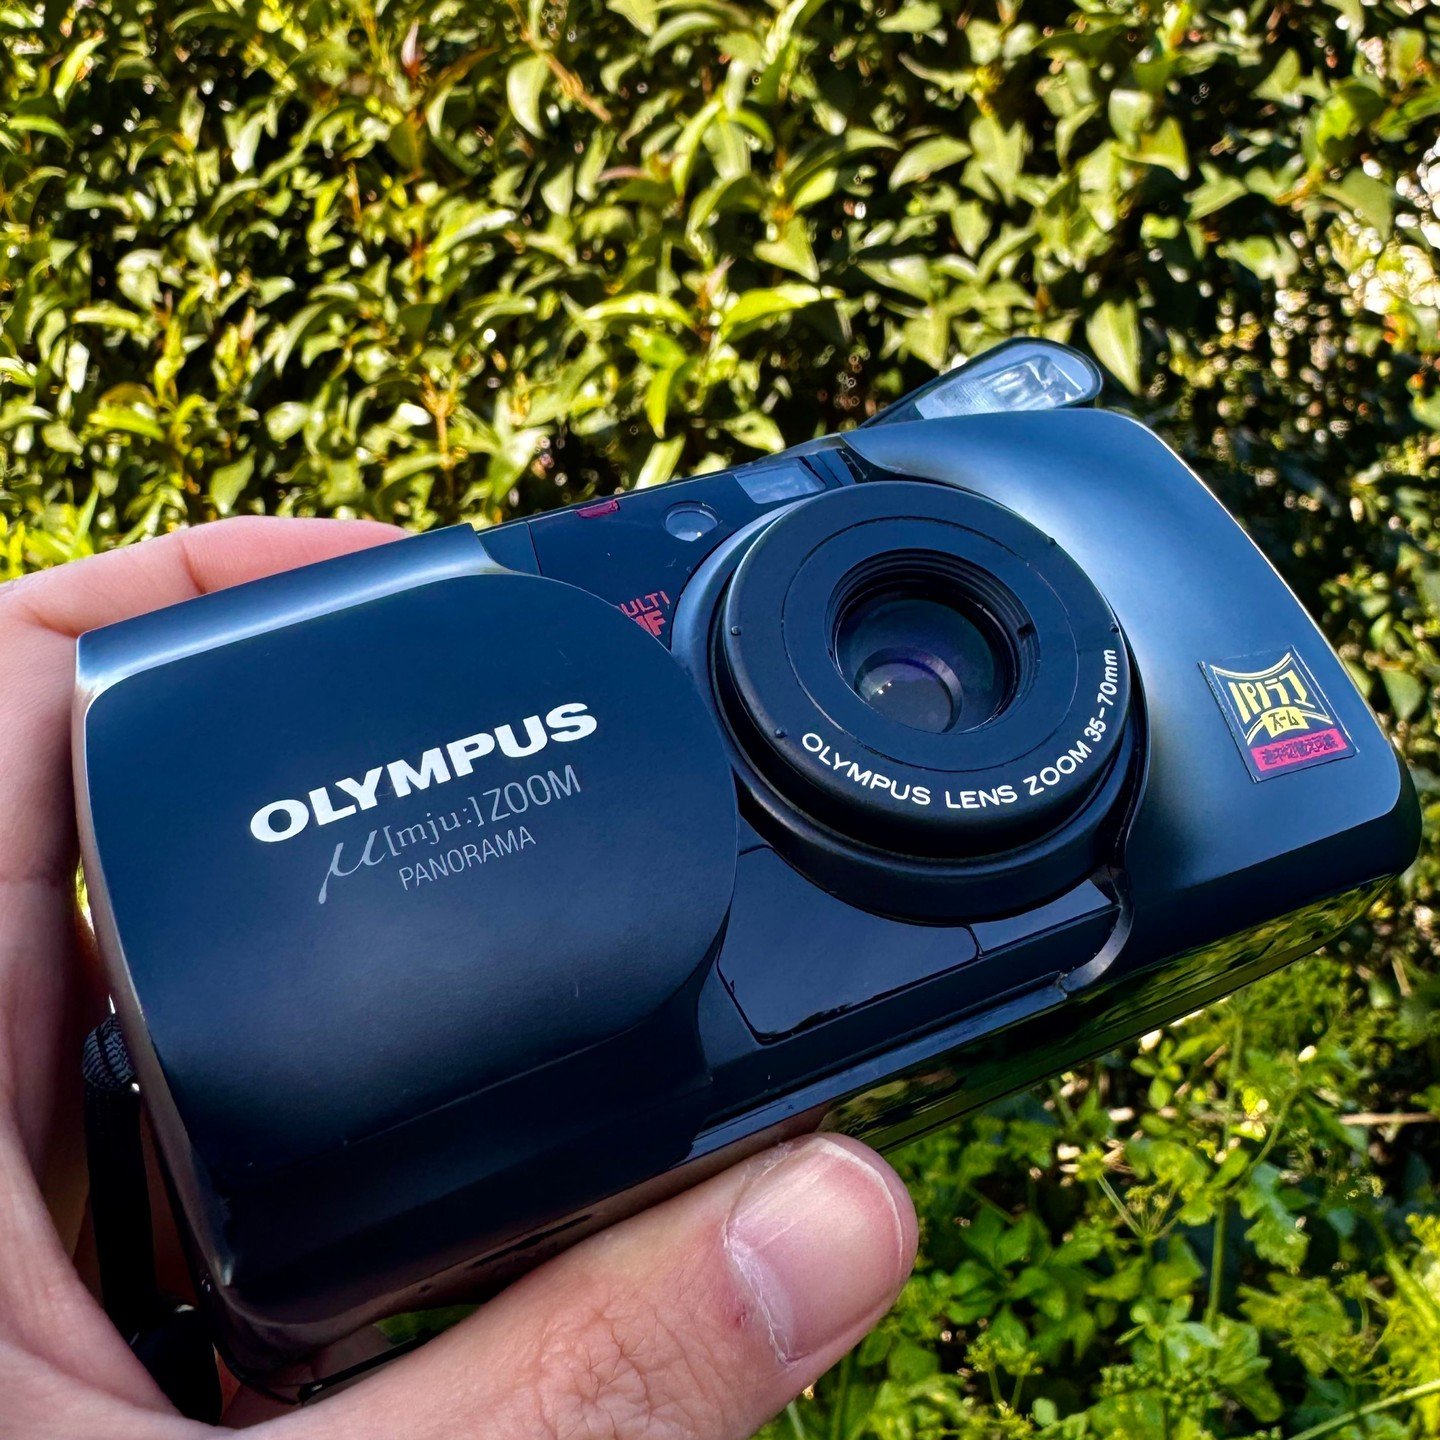 *New Arrival* - Olympus mju Zoom is an excellent compact travel camera with a versatile 35-70mm zoom lens, weatherproofing, flash and a panoramic mask perfect for landscape photos (see slide 5). For sale now in the link in bio.
.
.
#35mmfilm&nbsp;#ol